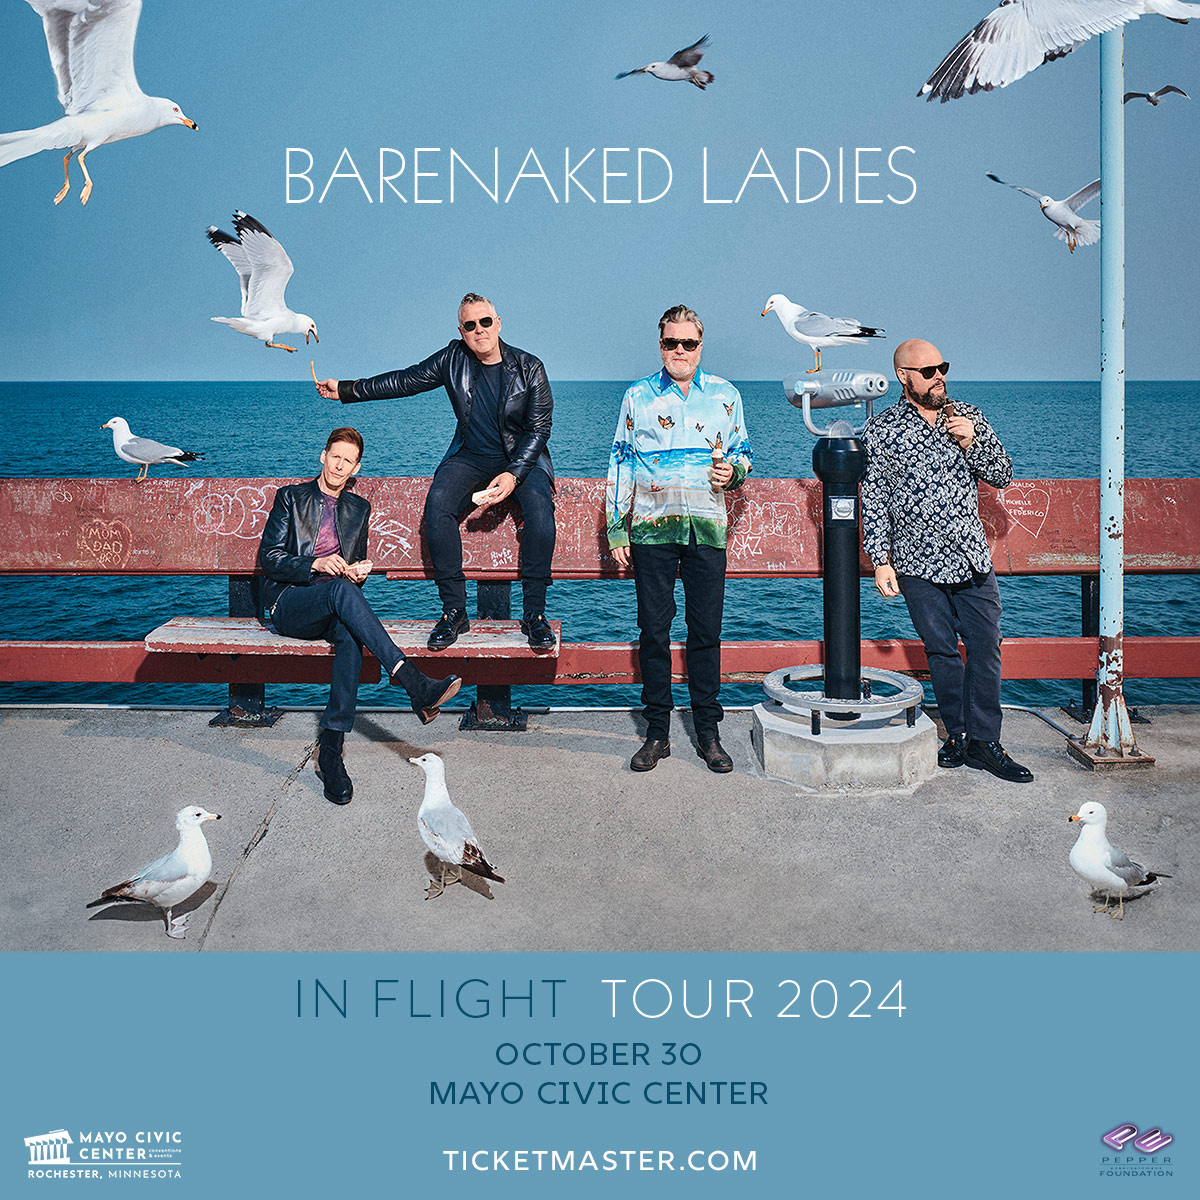 Get your Pre-Sale ticket now until 10pm tonight! Use code PEPPER at this link: bit.ly/BarenakedLadie… #PepperPresents Barenaked Ladies In Flight Tour October 30 | Mayo Civic Center